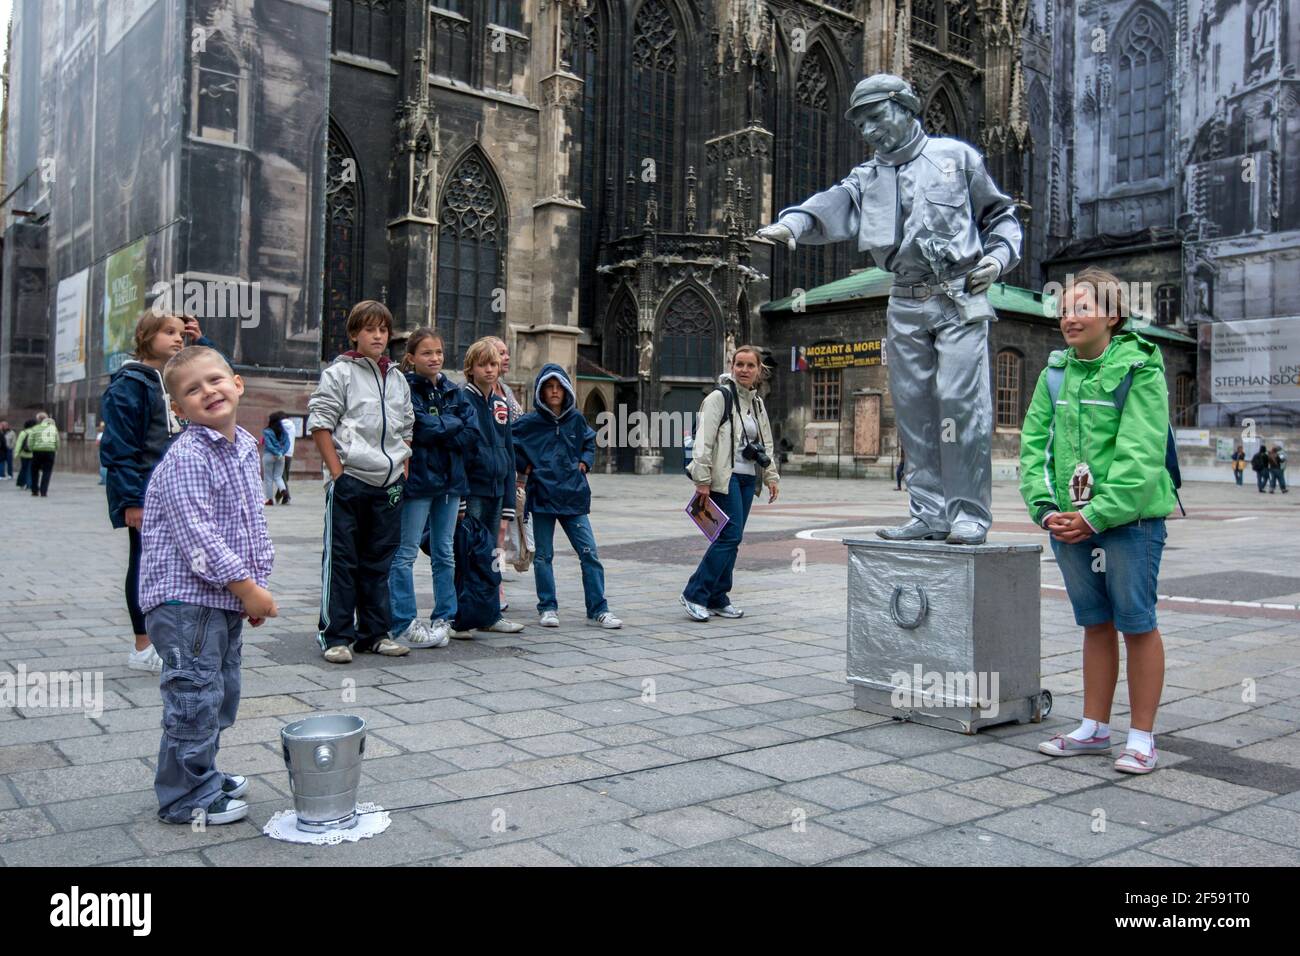 A boy drops a coin into the bucket of a statue street performer painted in silver at Vienna, Austria. In the background stands St Stephen's Cathedral. Stock Photo